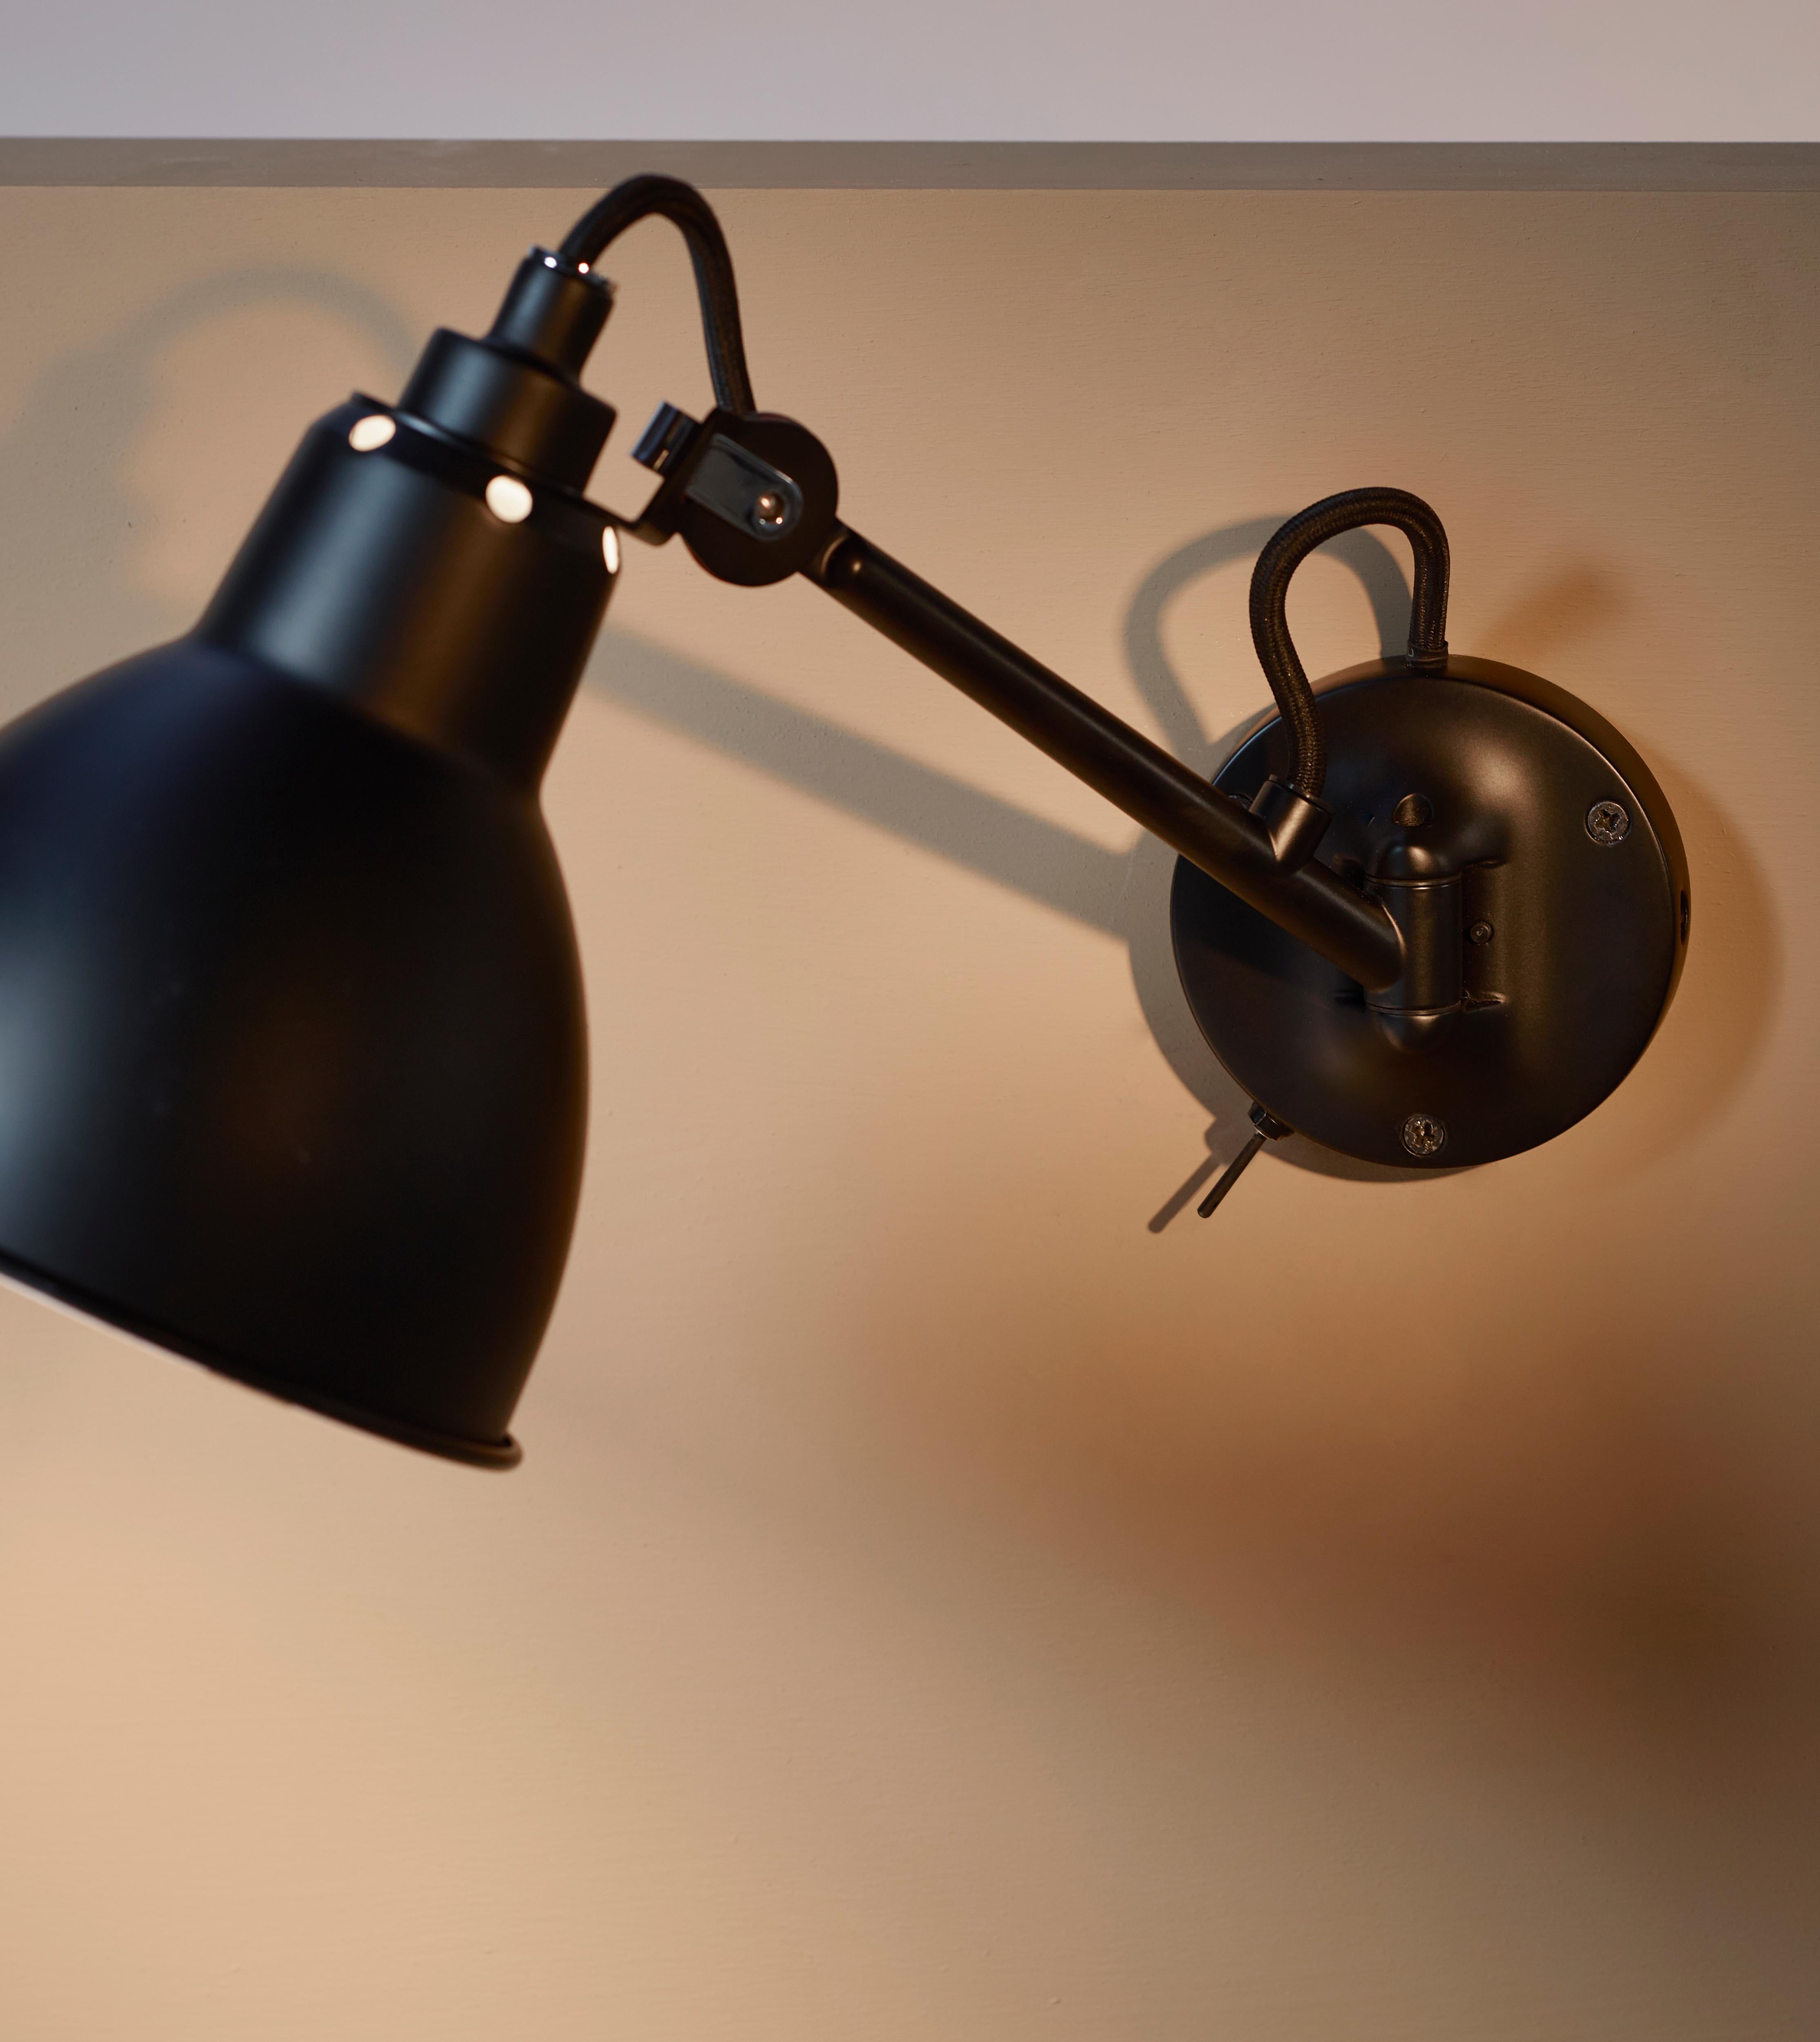 DCW Editions La Lampe Gras N°104 SW Wall Lamp in Black Steel Arm and Black Shade by Bernard-Albin Gras
 
 In 1921 Bernard-Albin GRAS designed a series of lamps for use in offices and in industrial environments. The GRAS lamp, as it was subsequently